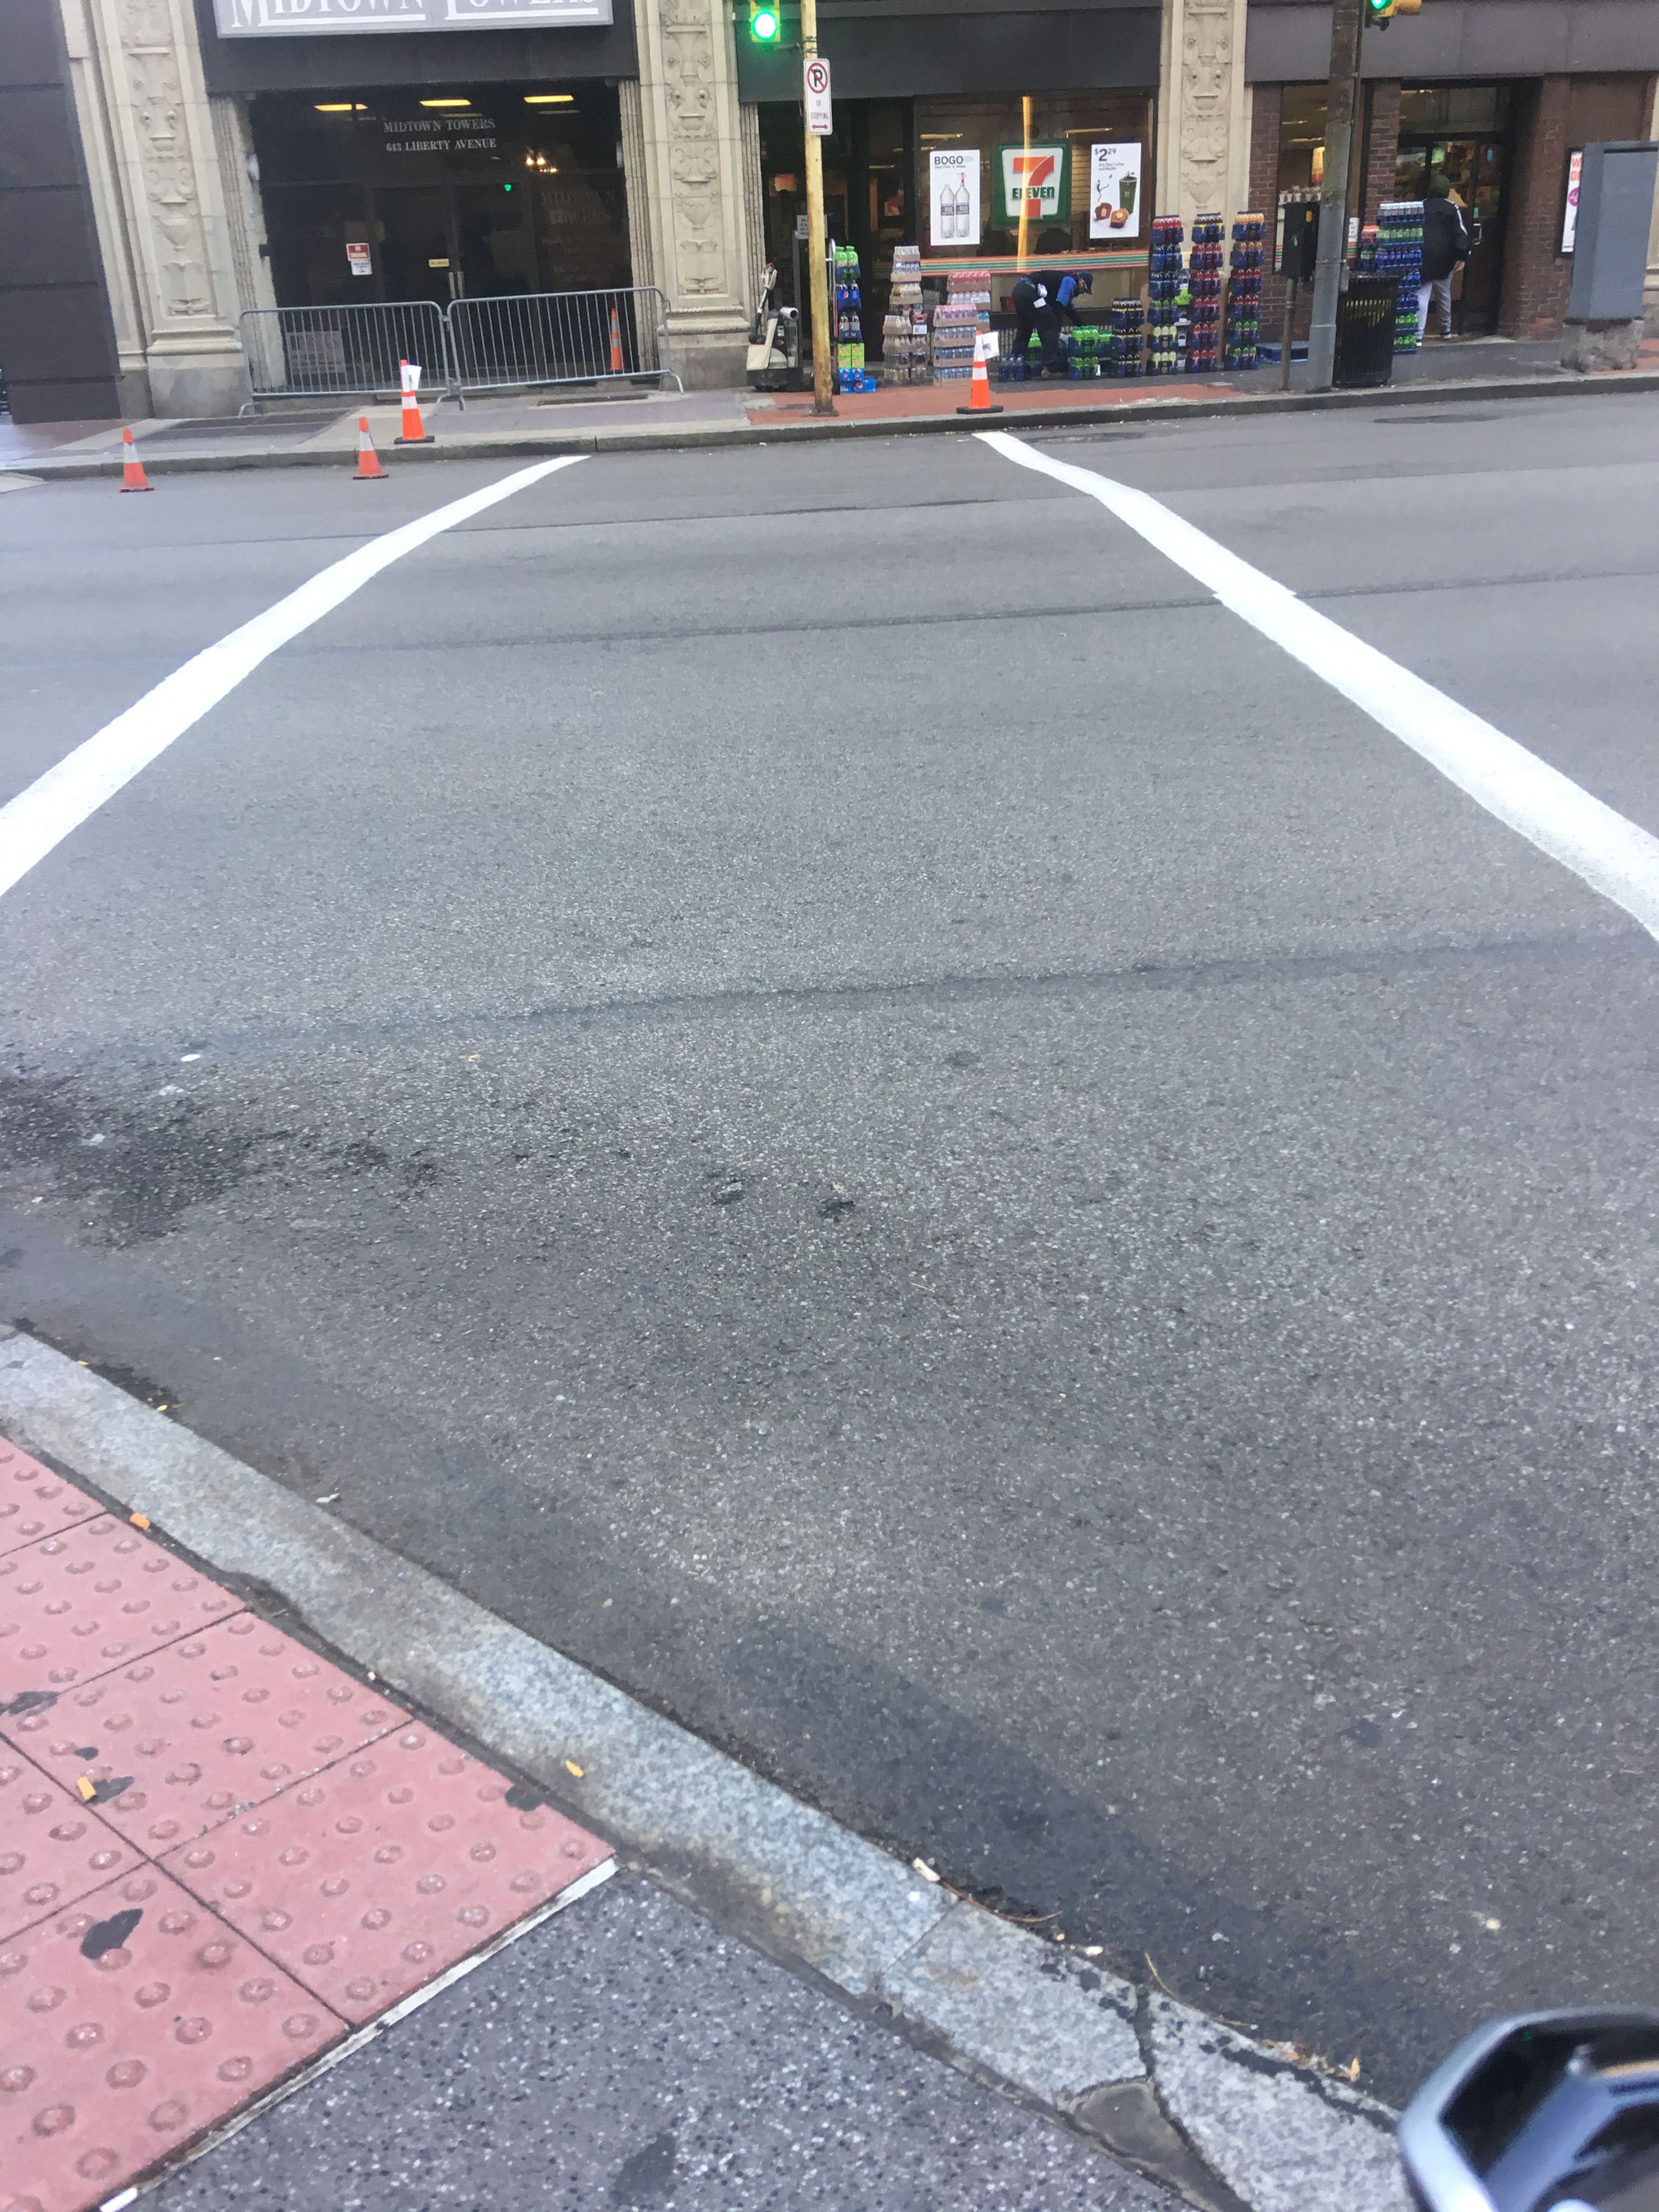 Photograph of a Downtown crosswalk. There’s a curb cut on one end of the crosswalk, but not the other.